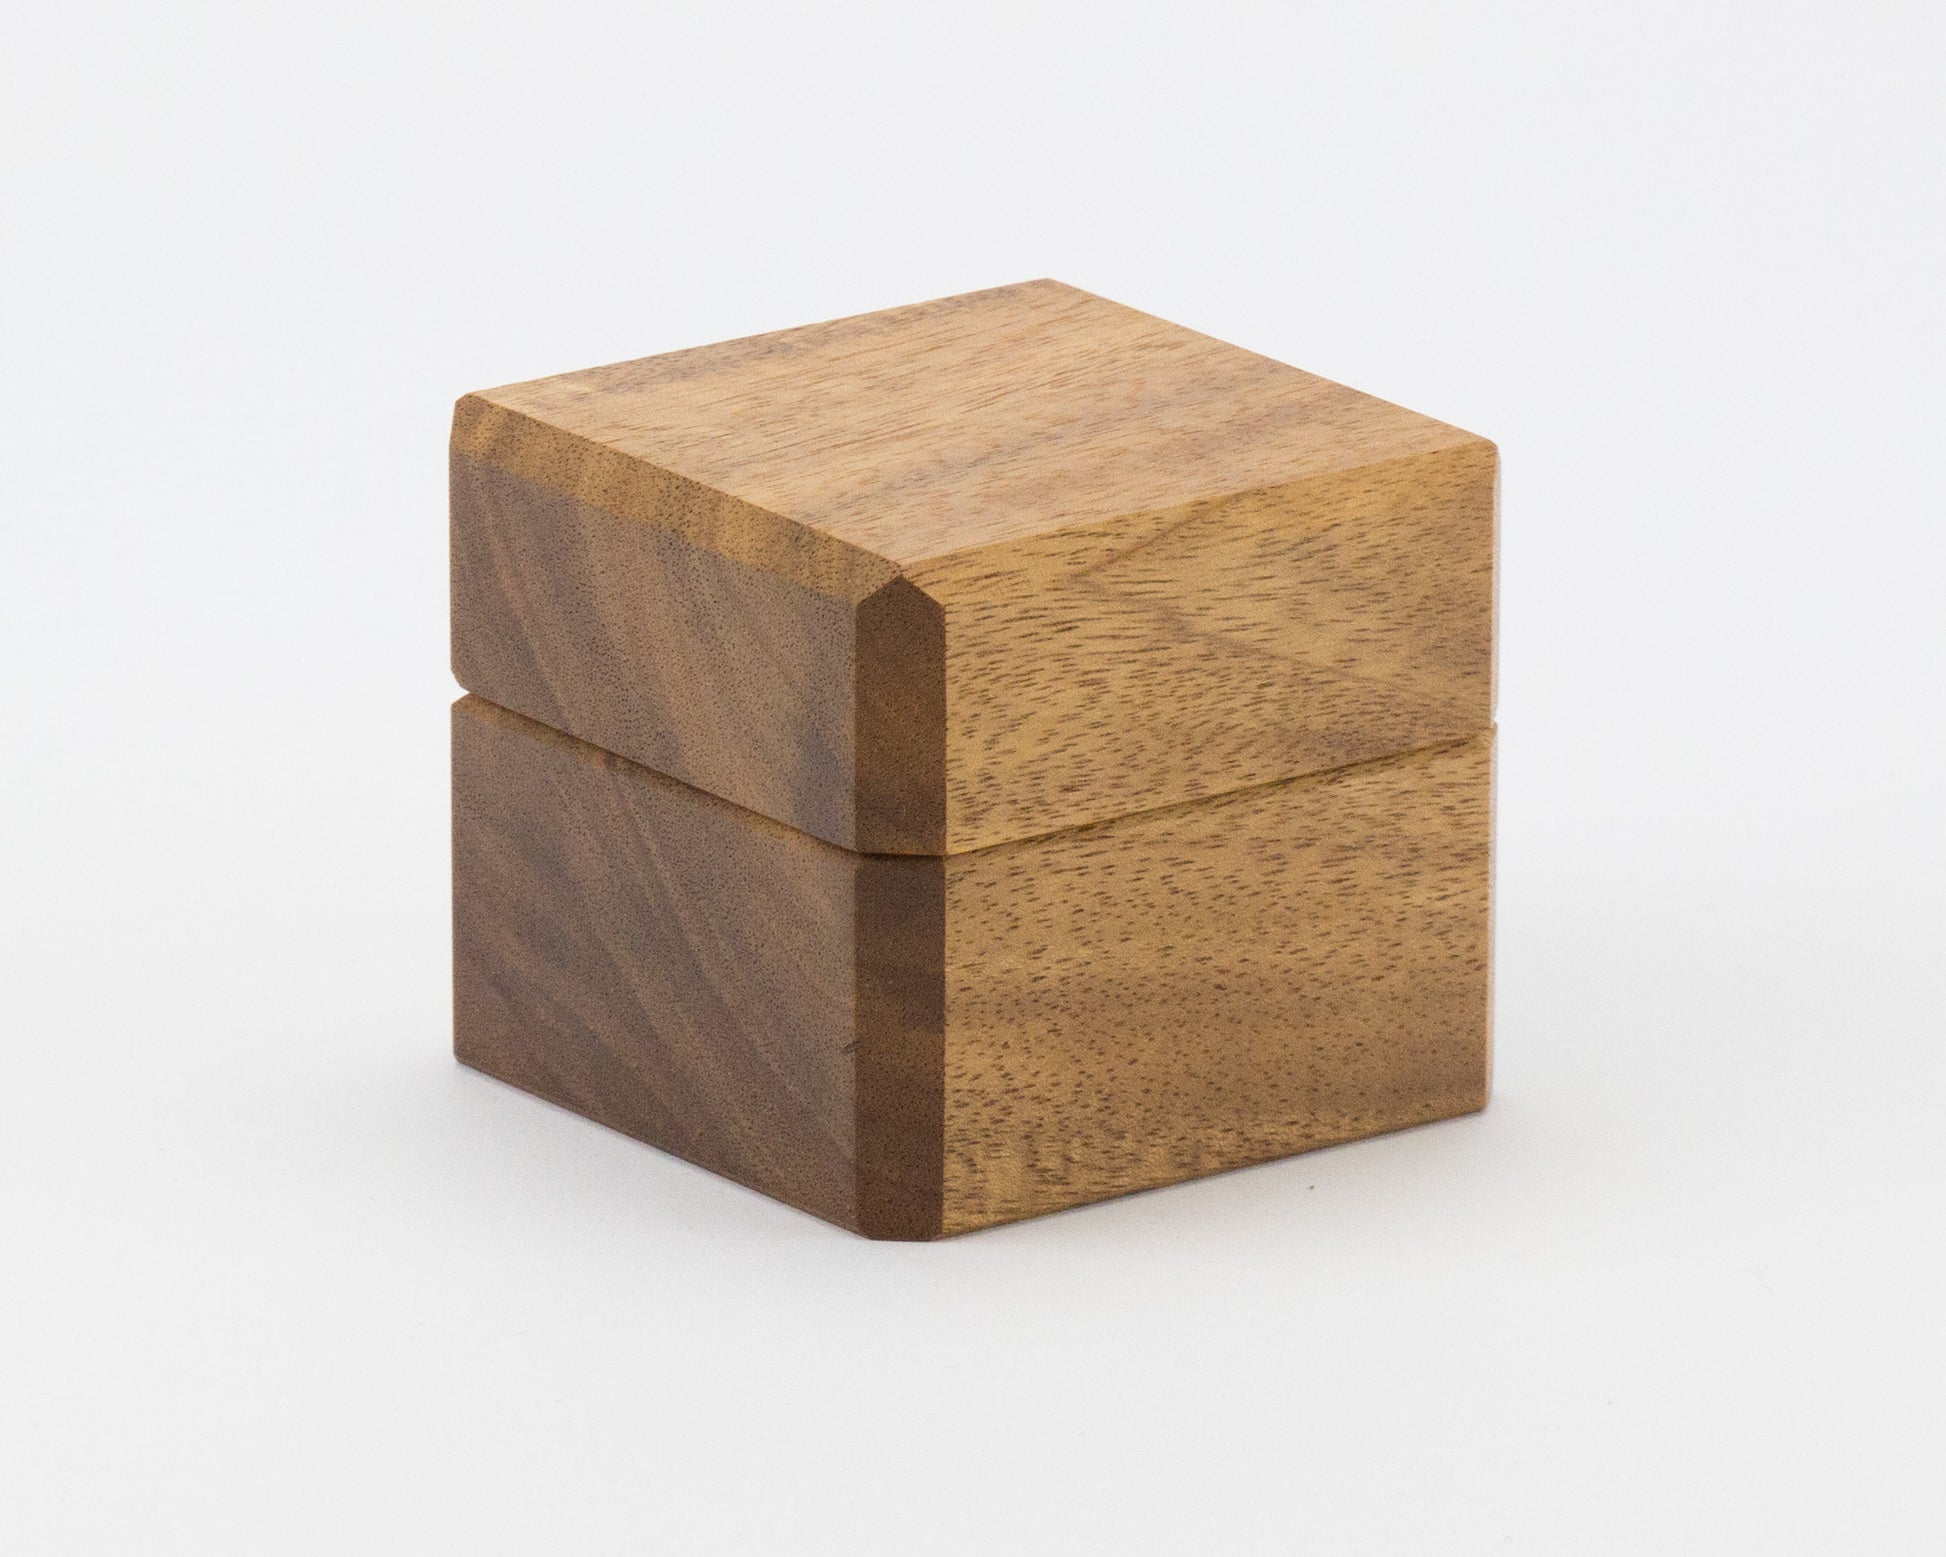 The Elegance wooden ring box handcrafted from Blackwood timber